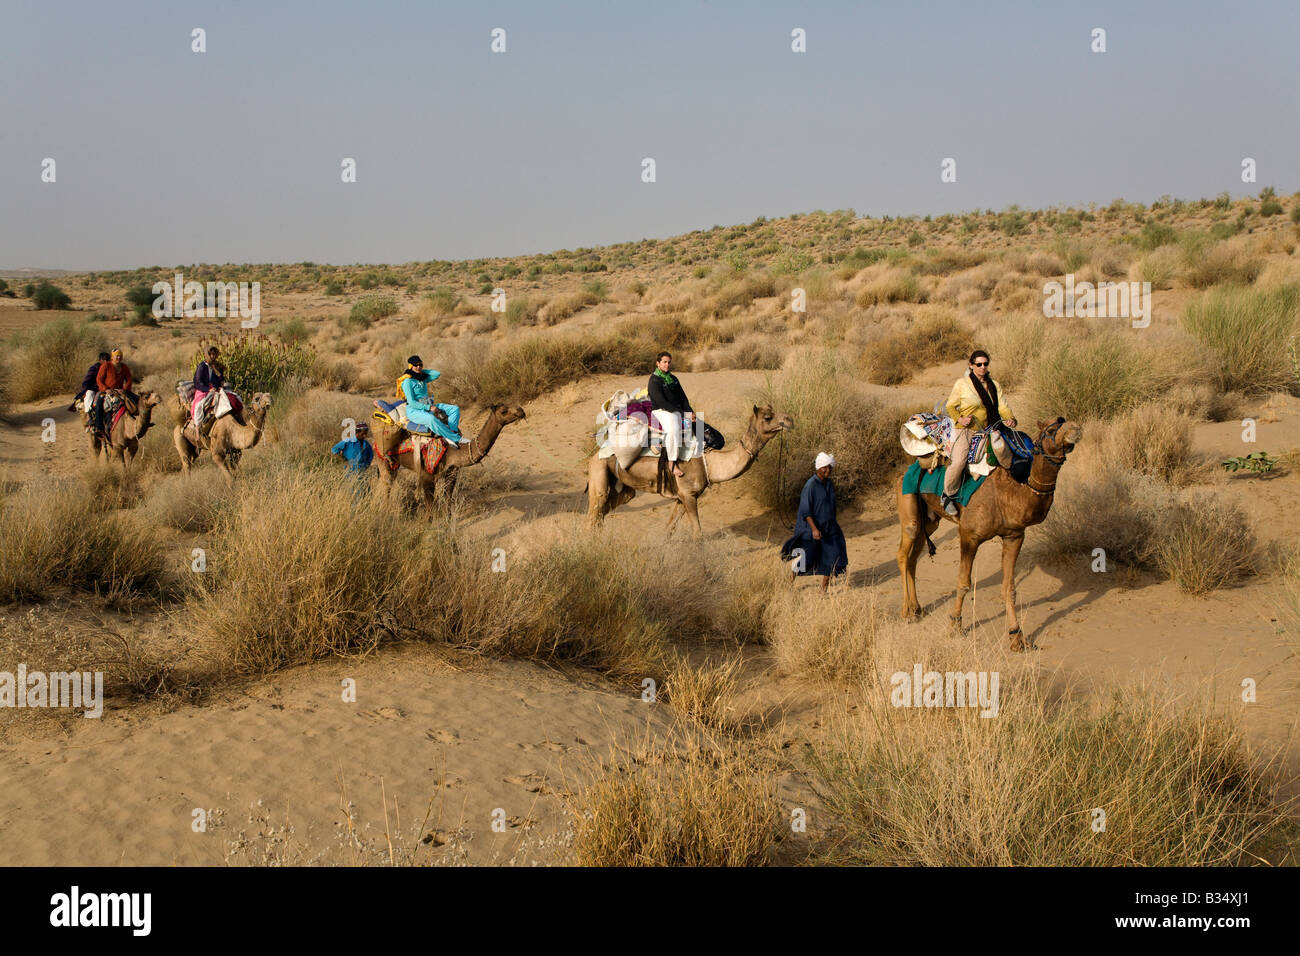 Tourists ride CAMELS in the THAR DESERT near JAISALMER RAJASTHAN INDIA MR Stock Photo